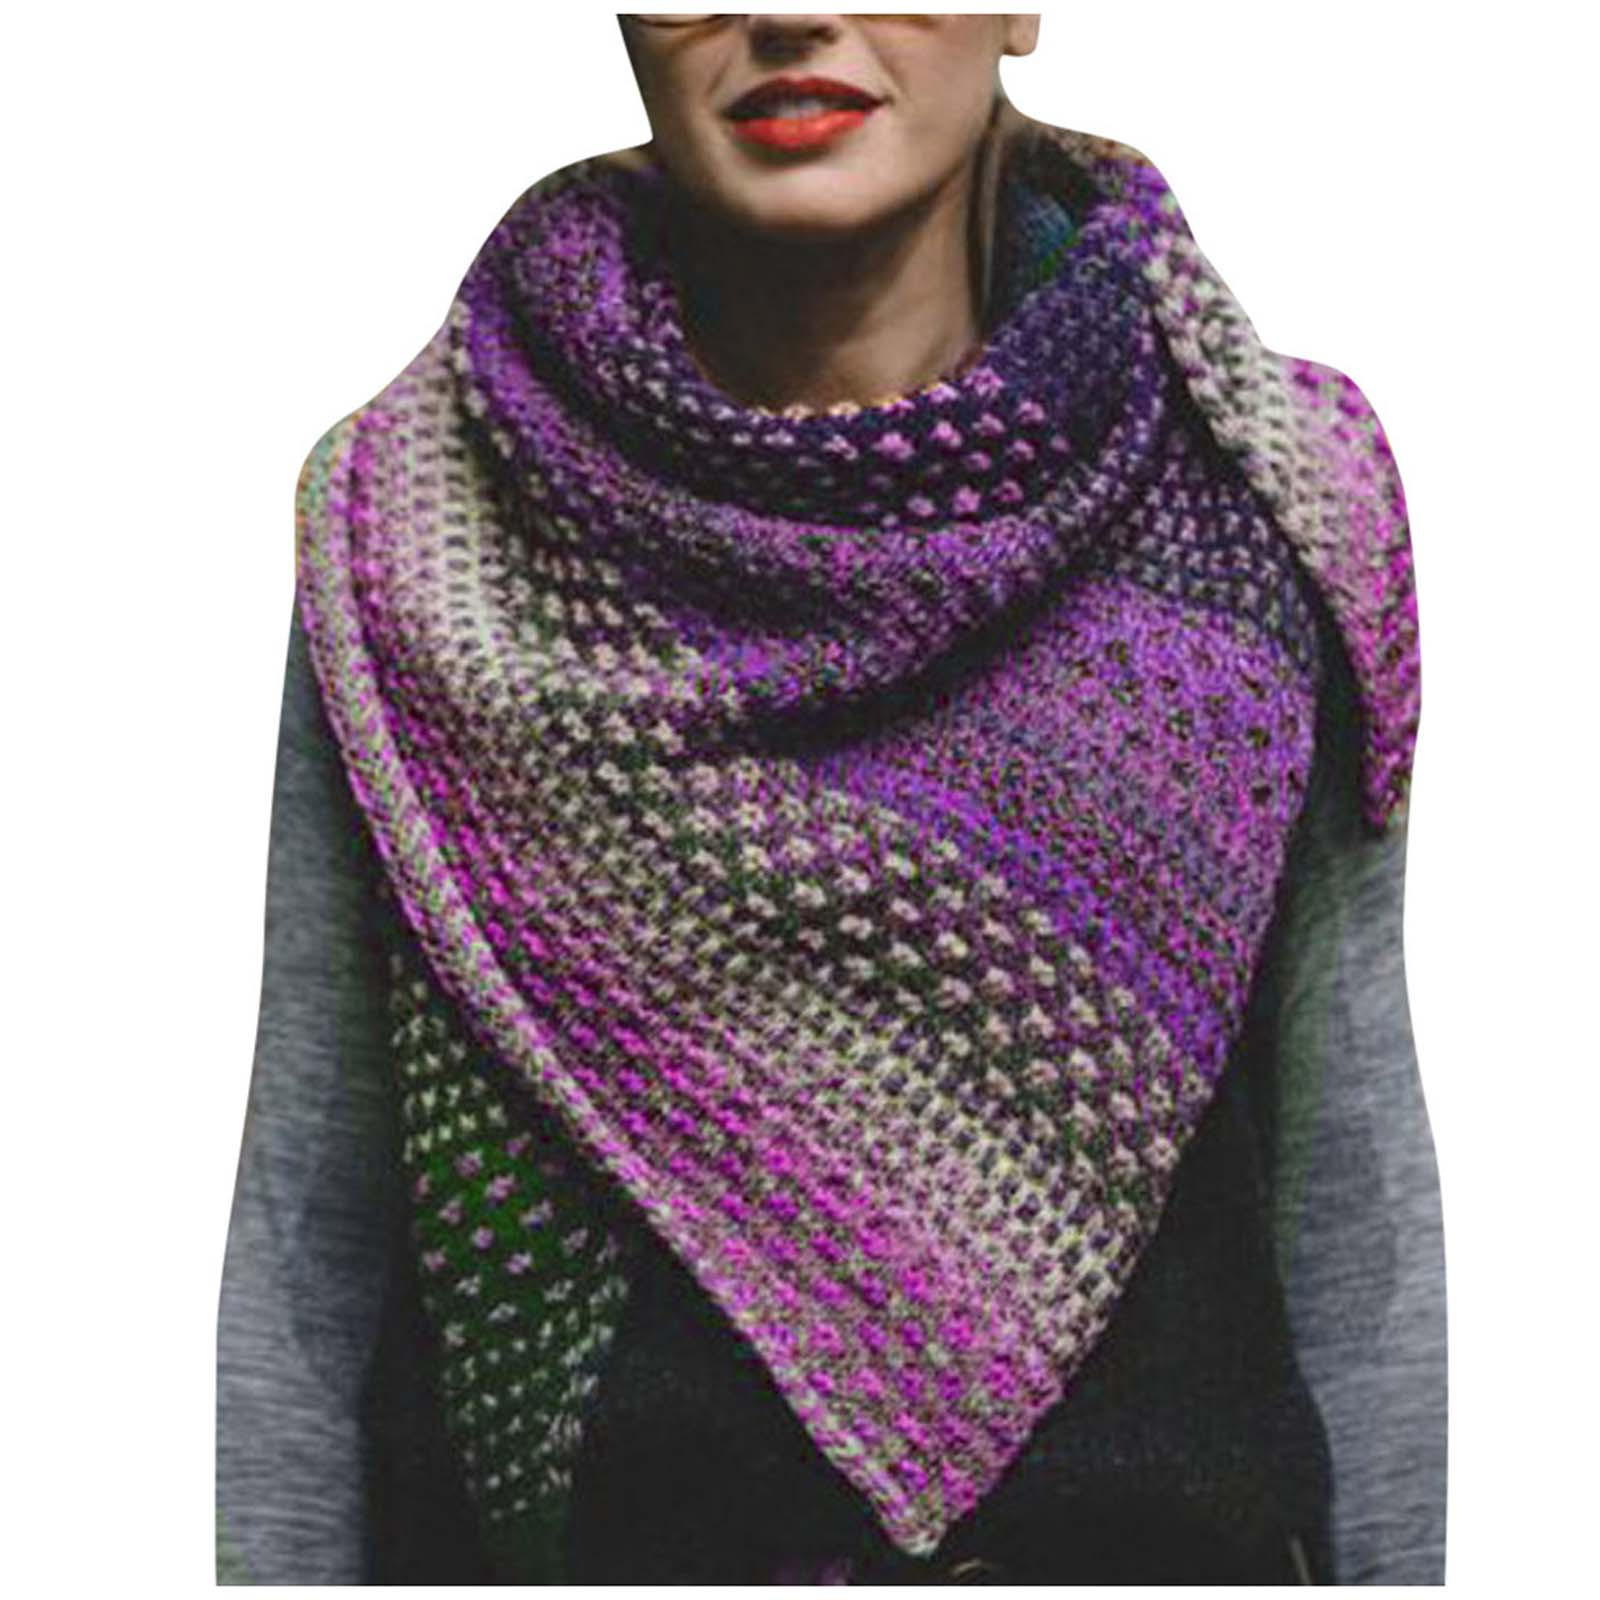 40# Women Winter Warm Sided Colorful Color Crochet Thickened Knit Soft Shawl Scarf Vintage Autumn Plaid Long Scarf Shawls